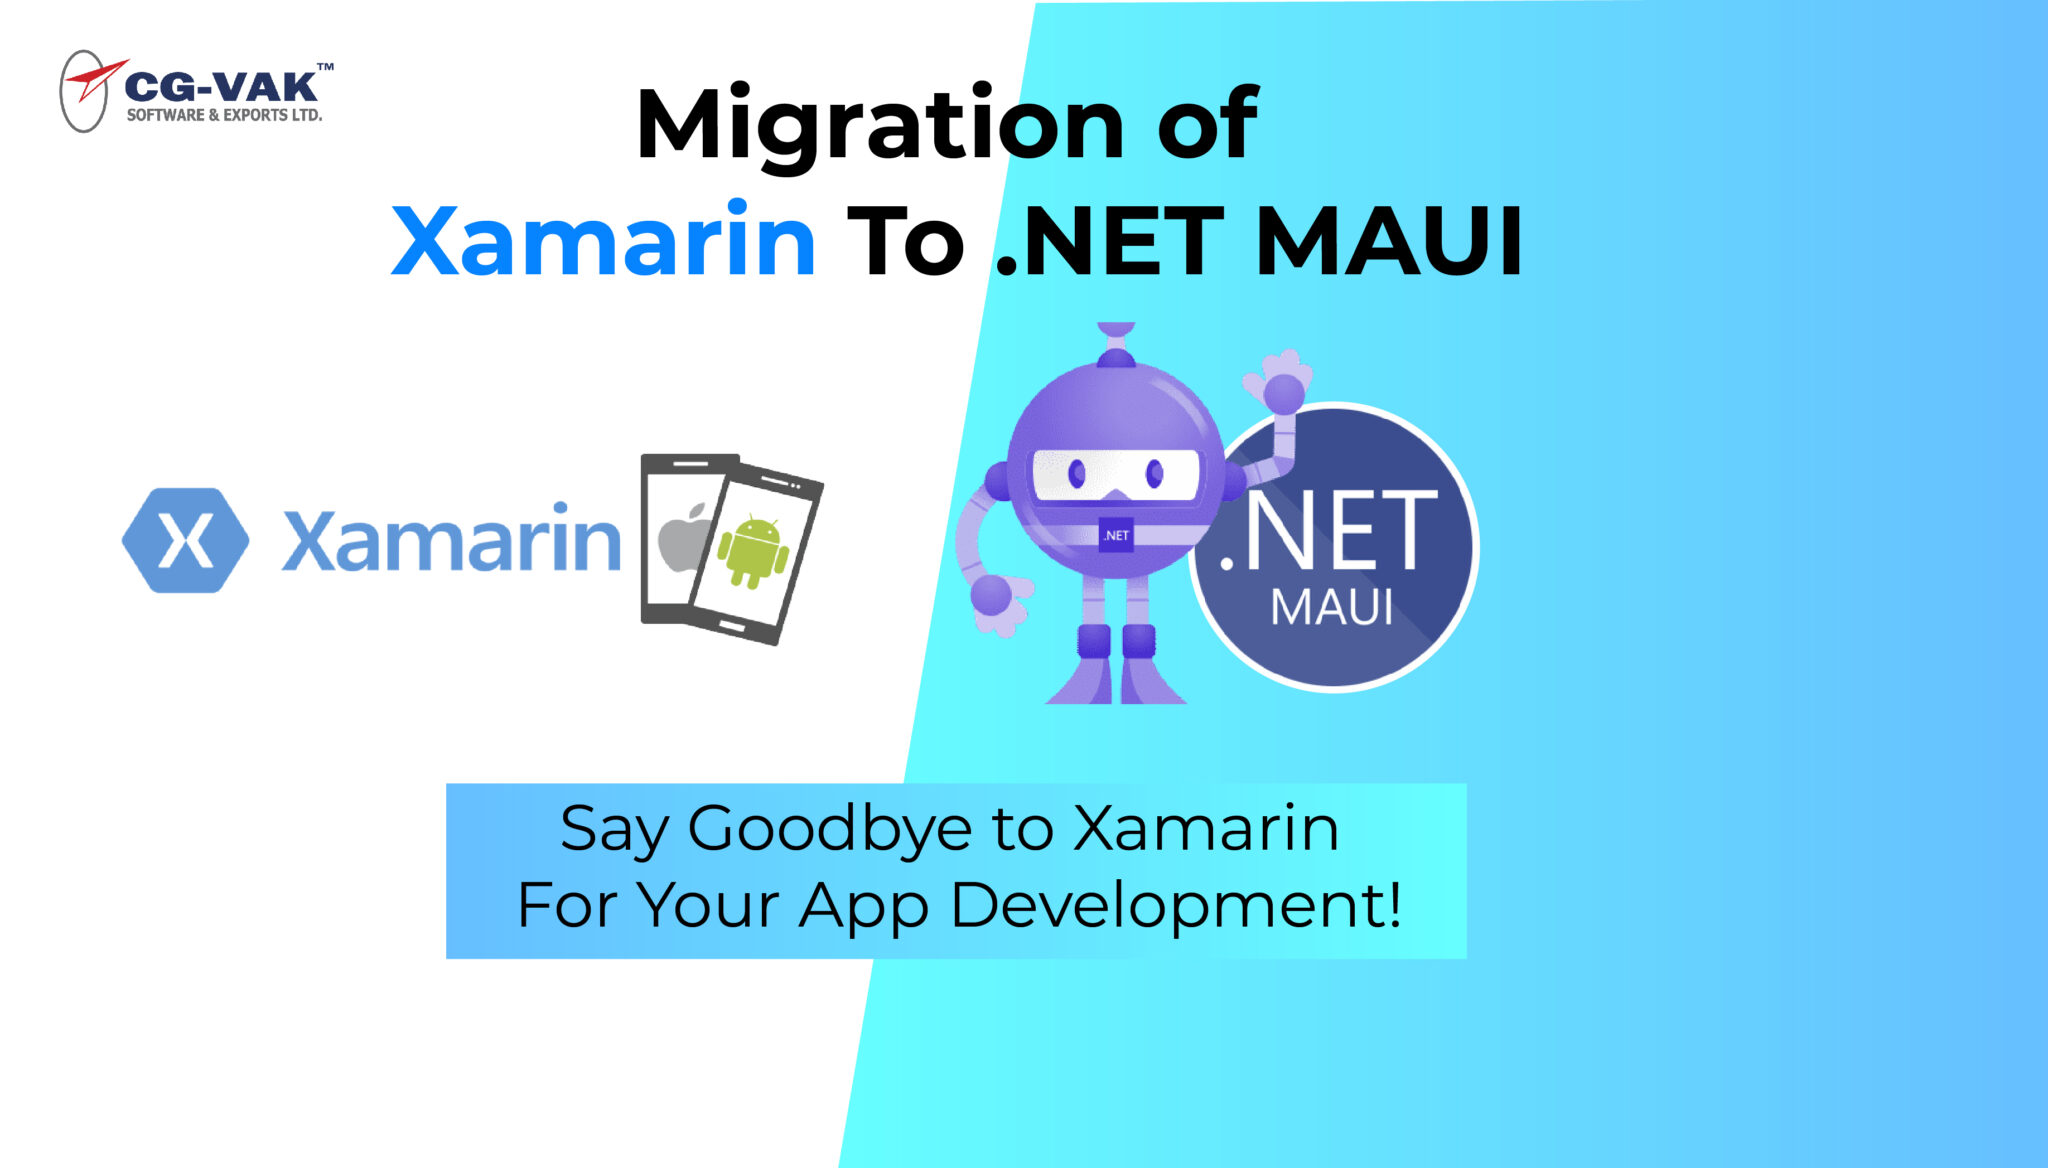 Migrate Xamarin To Net MAUI For Application Development